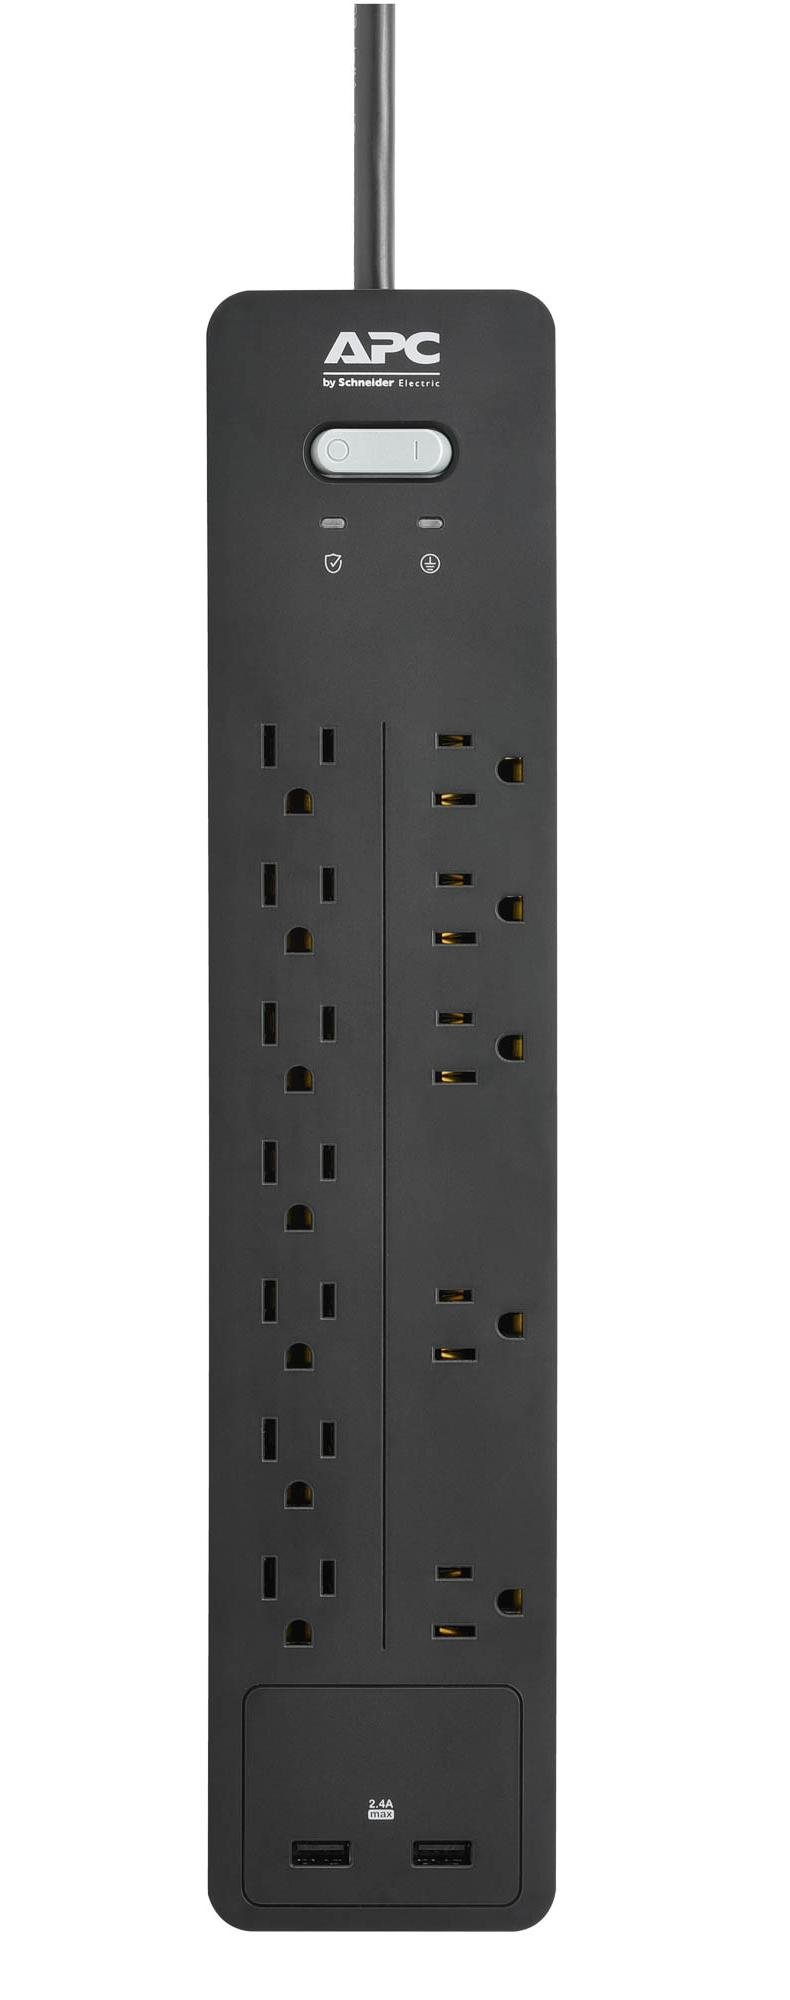 APC Surge Protector Power Strip with USB Charging Ports, PH12U2, 2160 Joules, Flat Plug, 12 Outlets Black